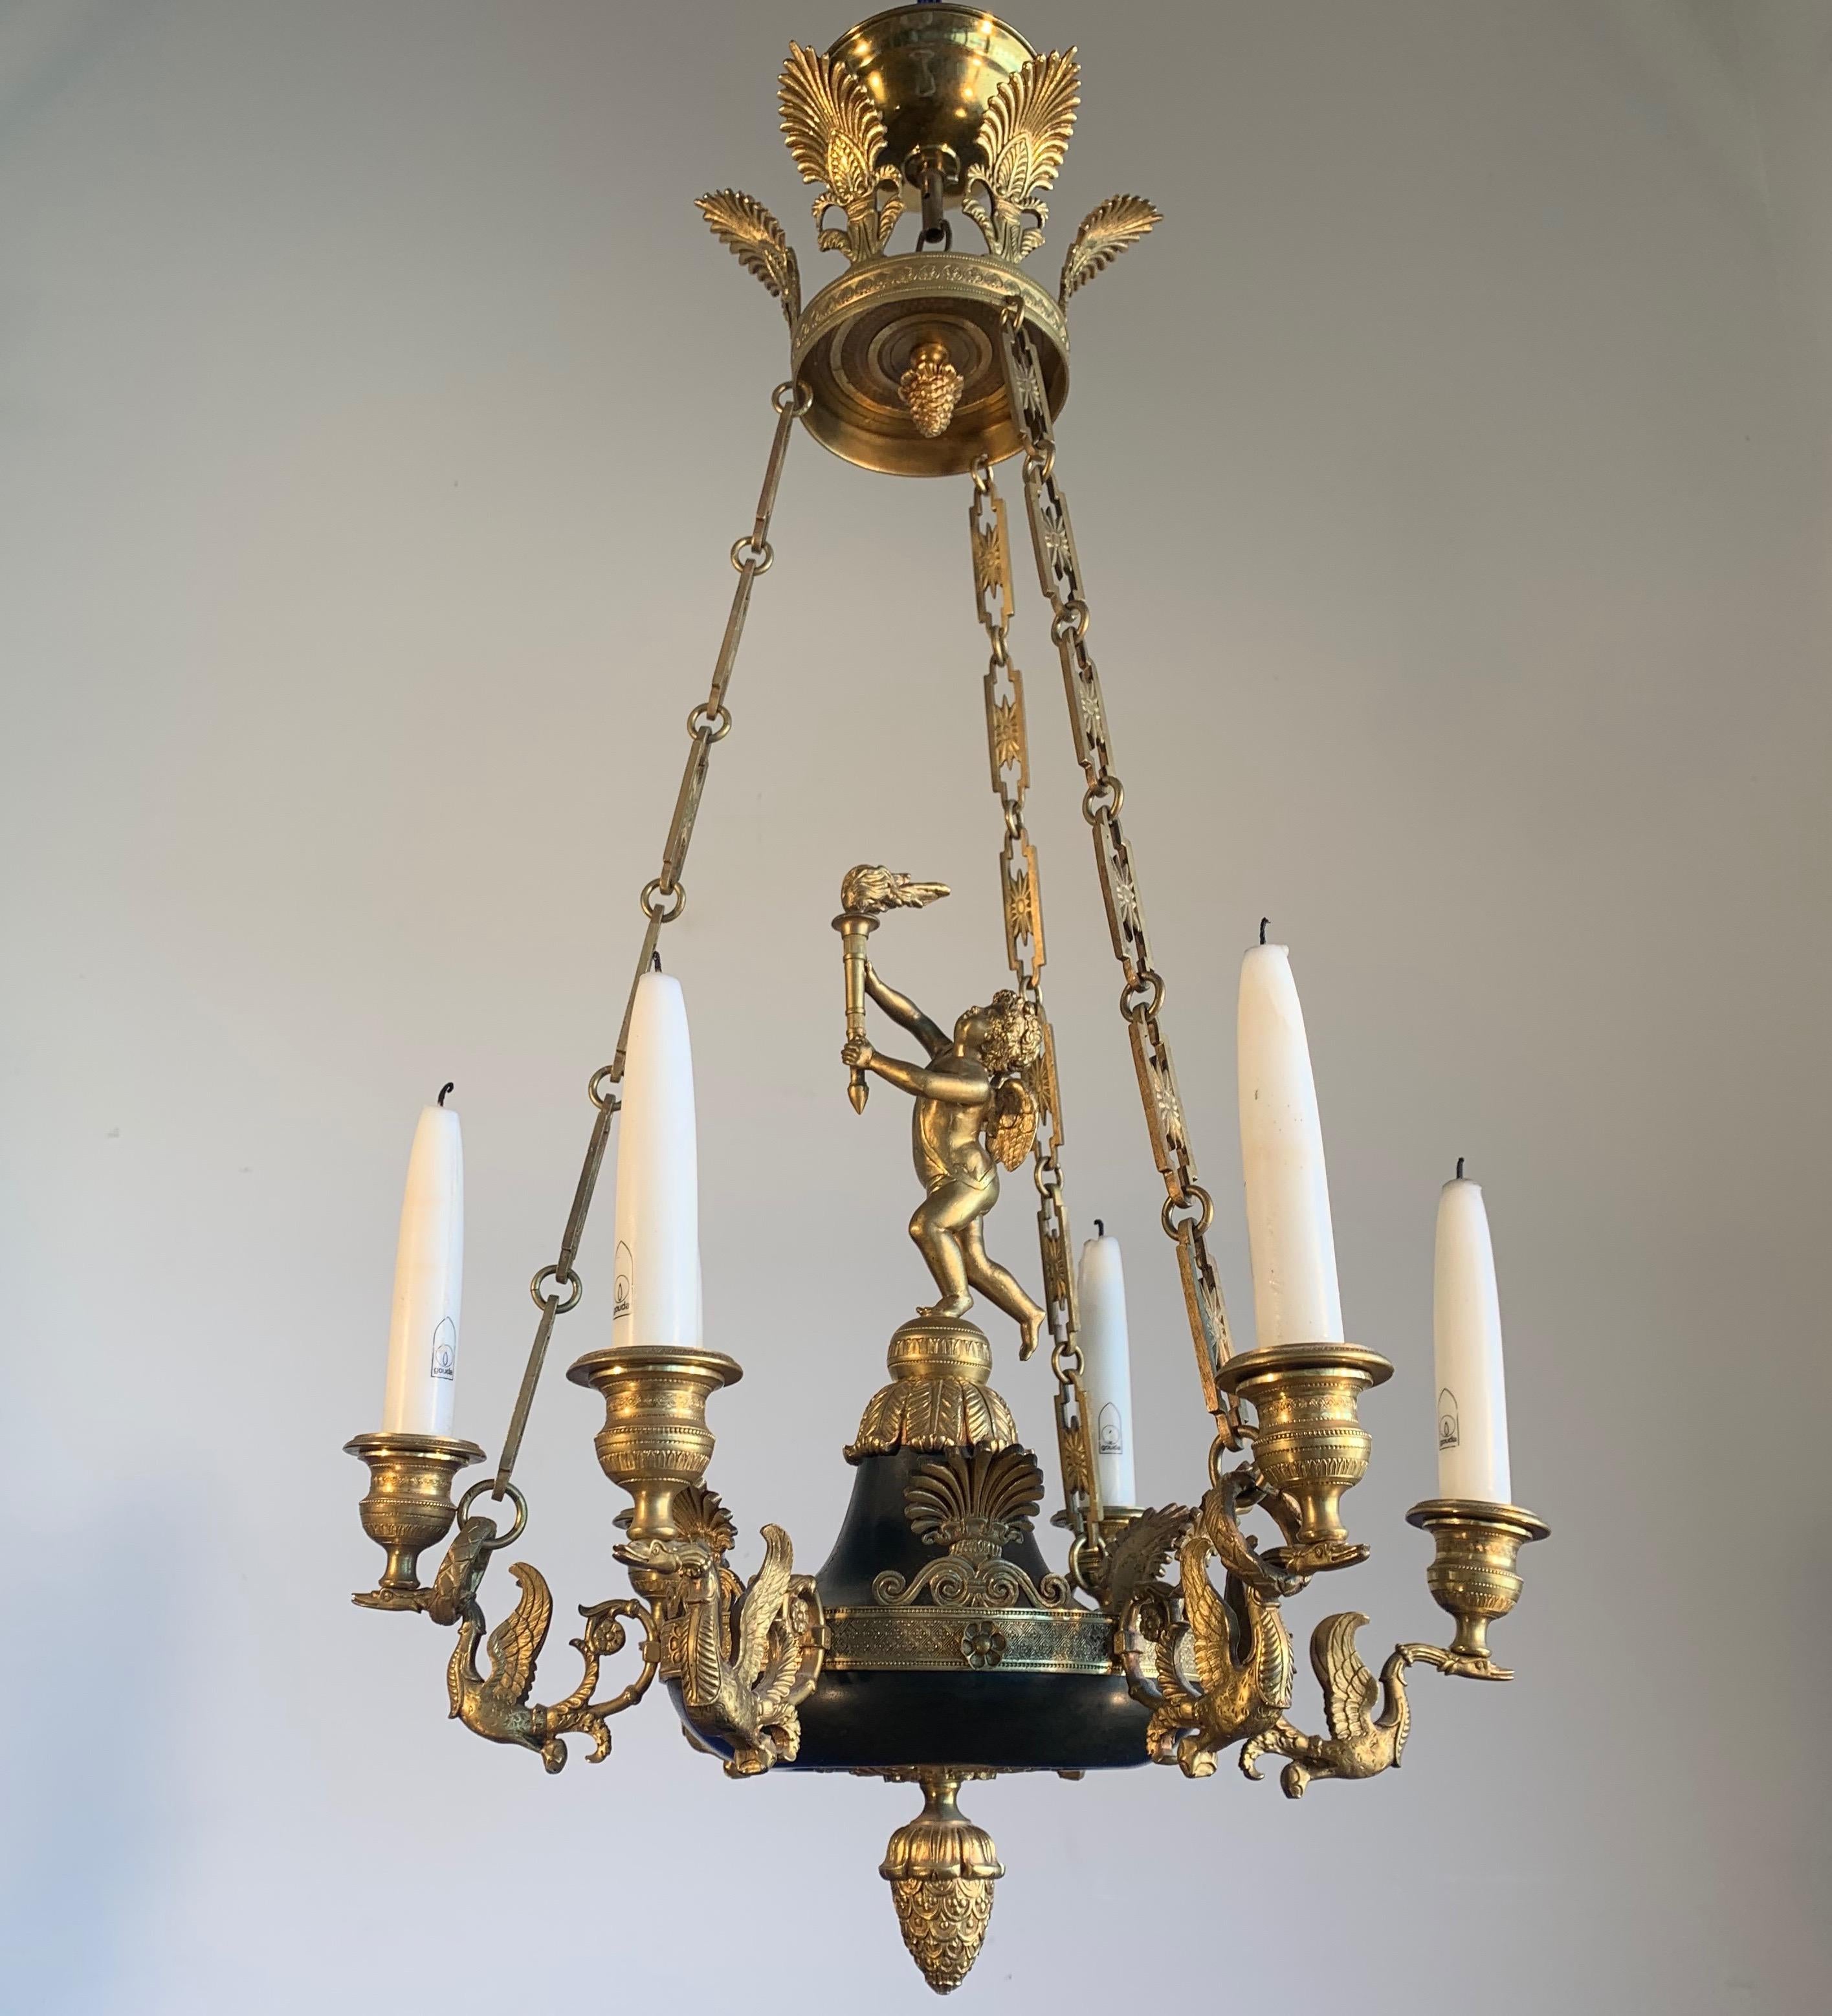 Empire Revival Antique French Empire Gilt Bronze Candle Pendant Light or Chandelier with Cherub For Sale